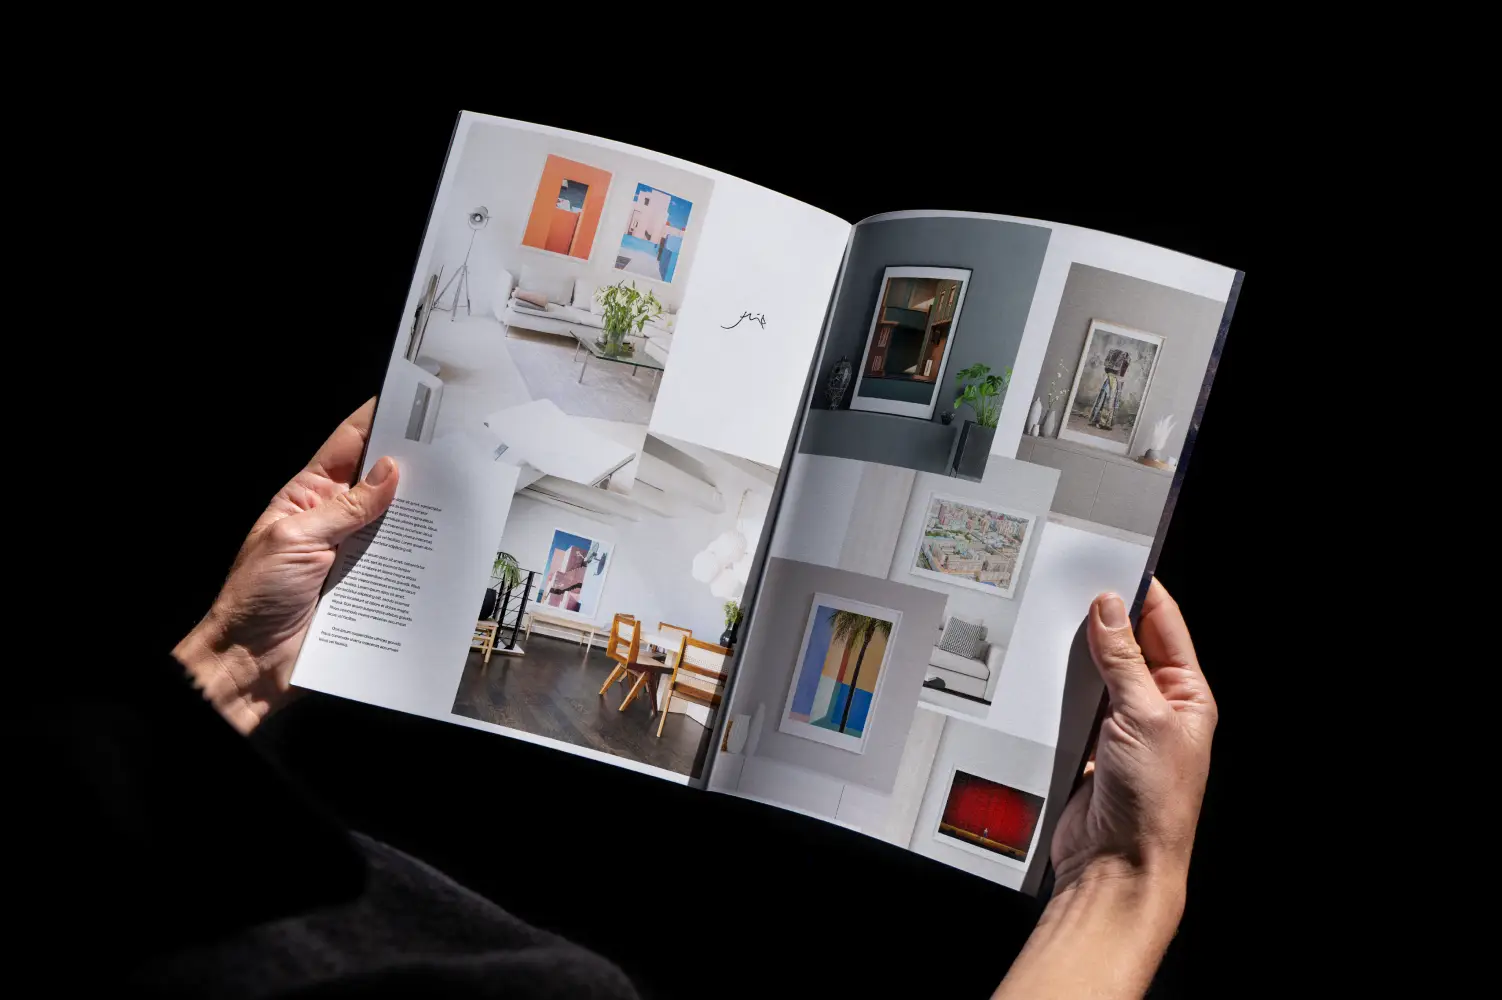 Eye-catching brochure design conveying FLIP's message and art photography work